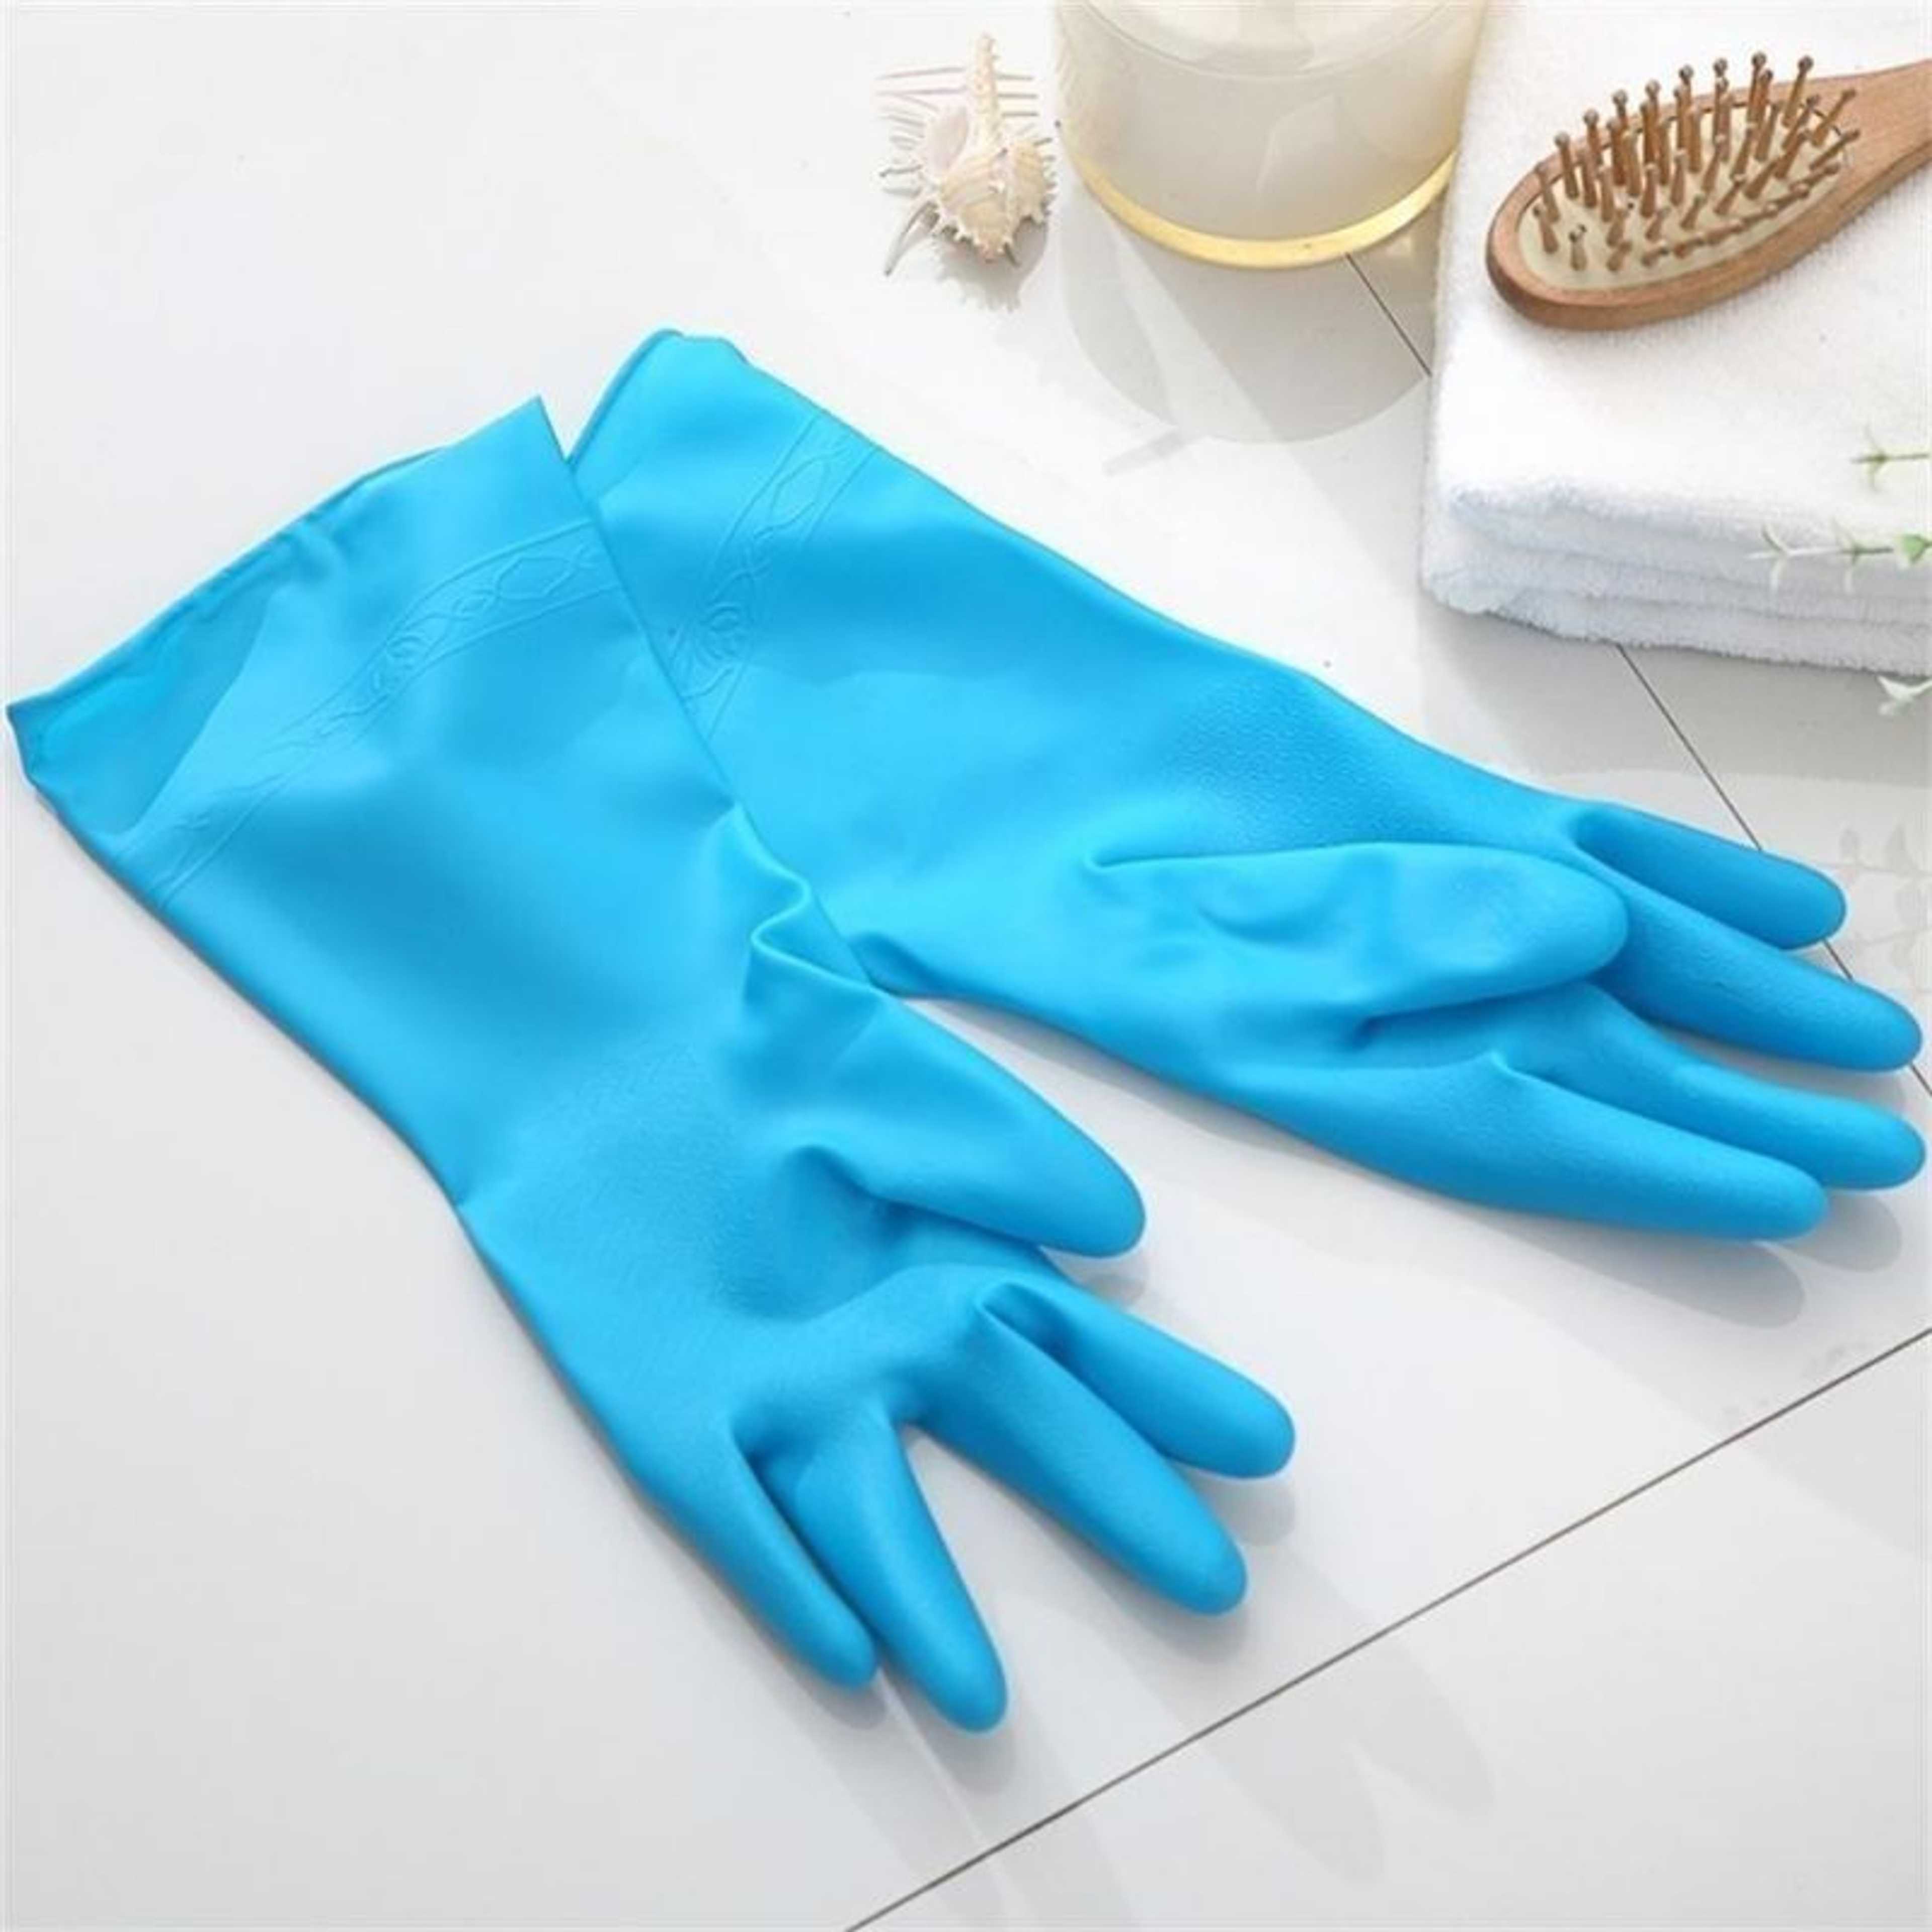 Rubber Washing Gloves for cleaning & Kitchen